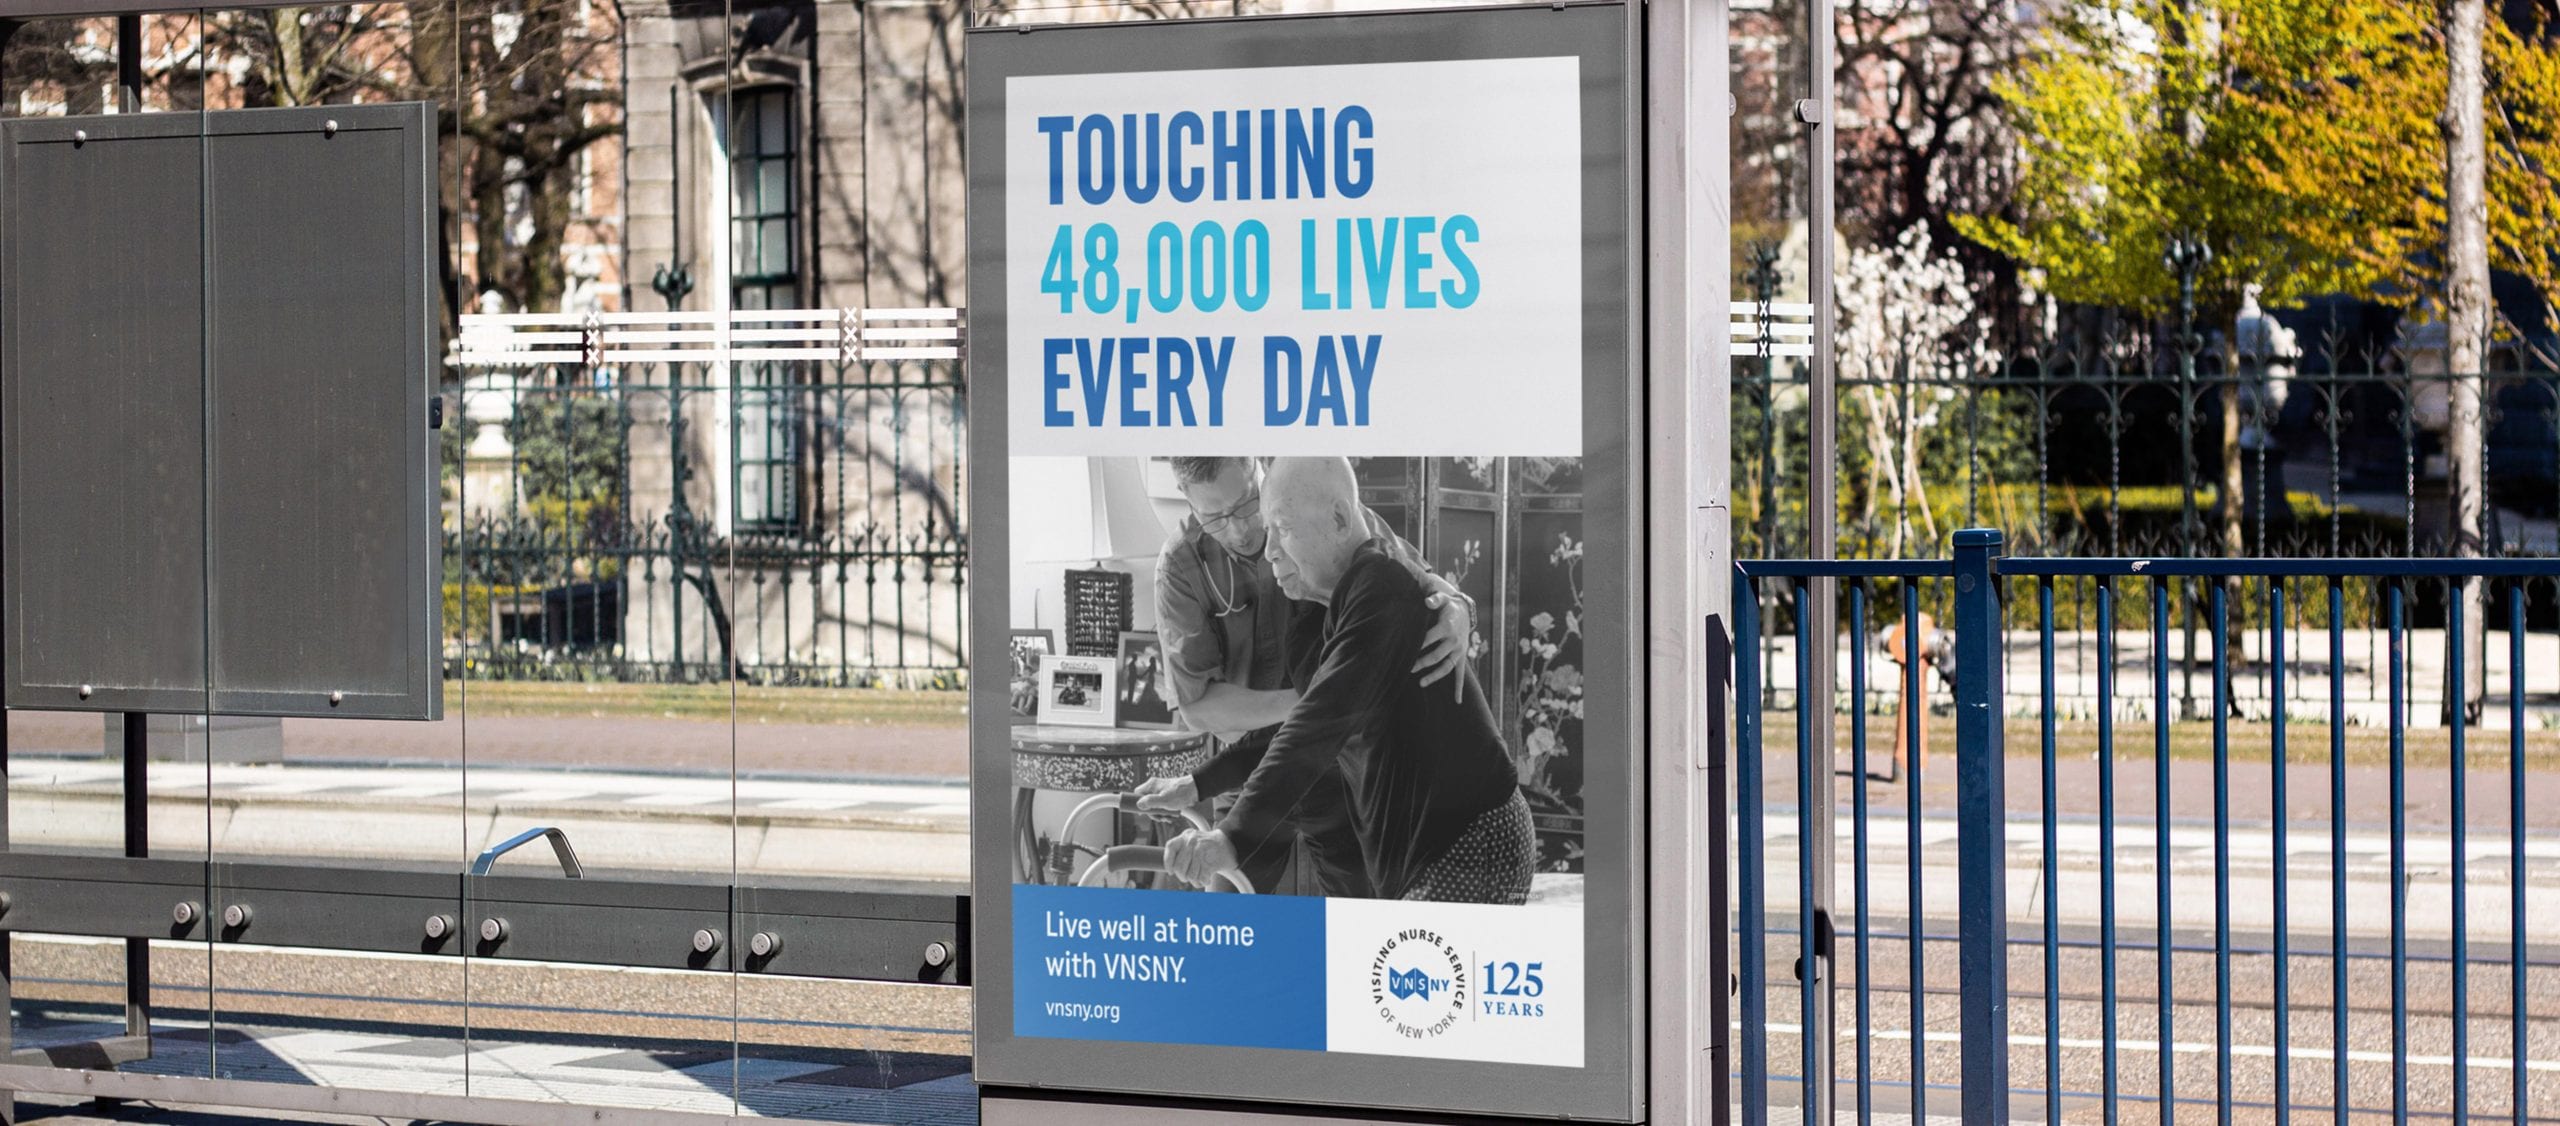 VNSNY Touching 48,000 Lives Hero Image